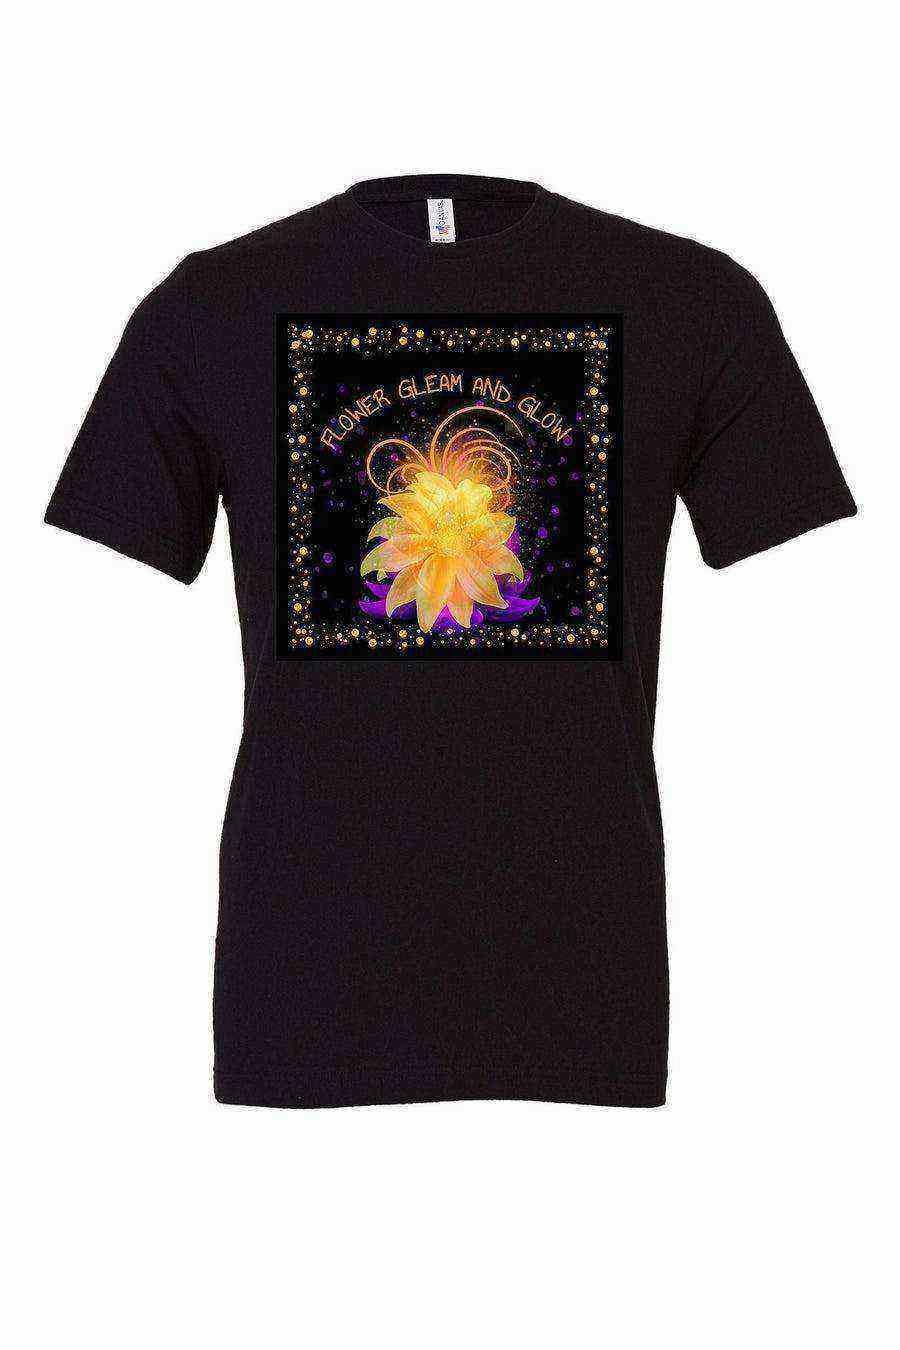 Youth | Flower Gleam And Glow Shirt | Magic Golden Flower Shirt - Dylan's Tees